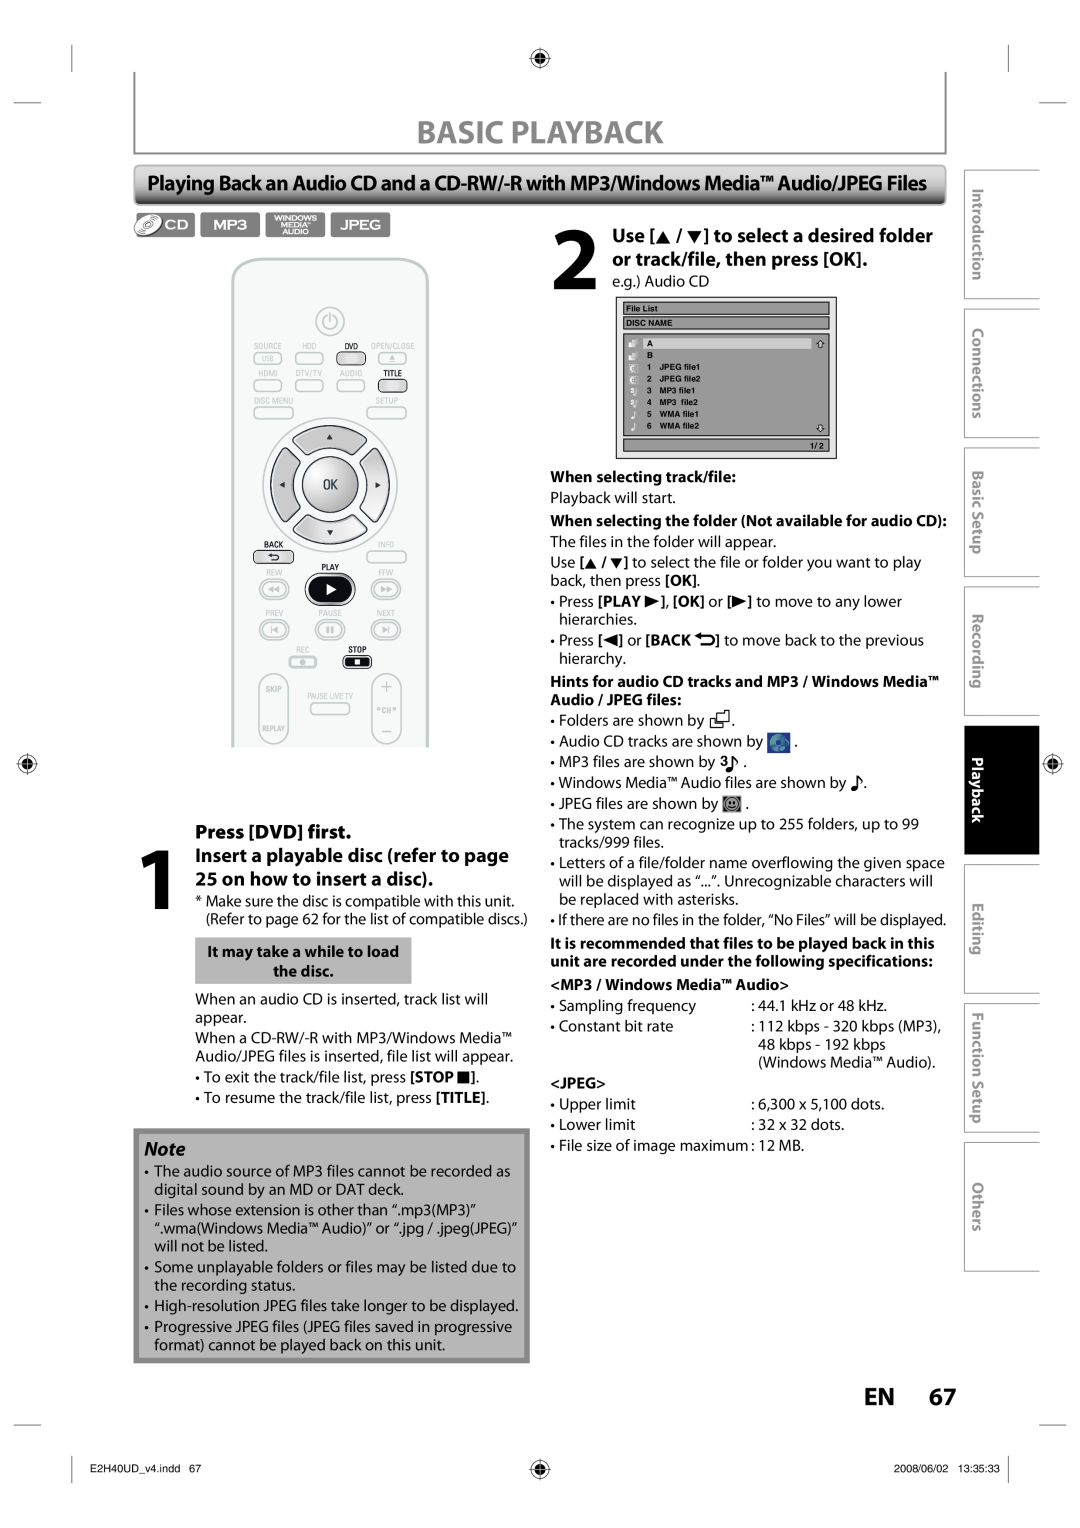 Philips DVDR3575H/37 Press DVD first, Insert a playable disc refer to page 25 on how to insert a disc, Basic Playback 